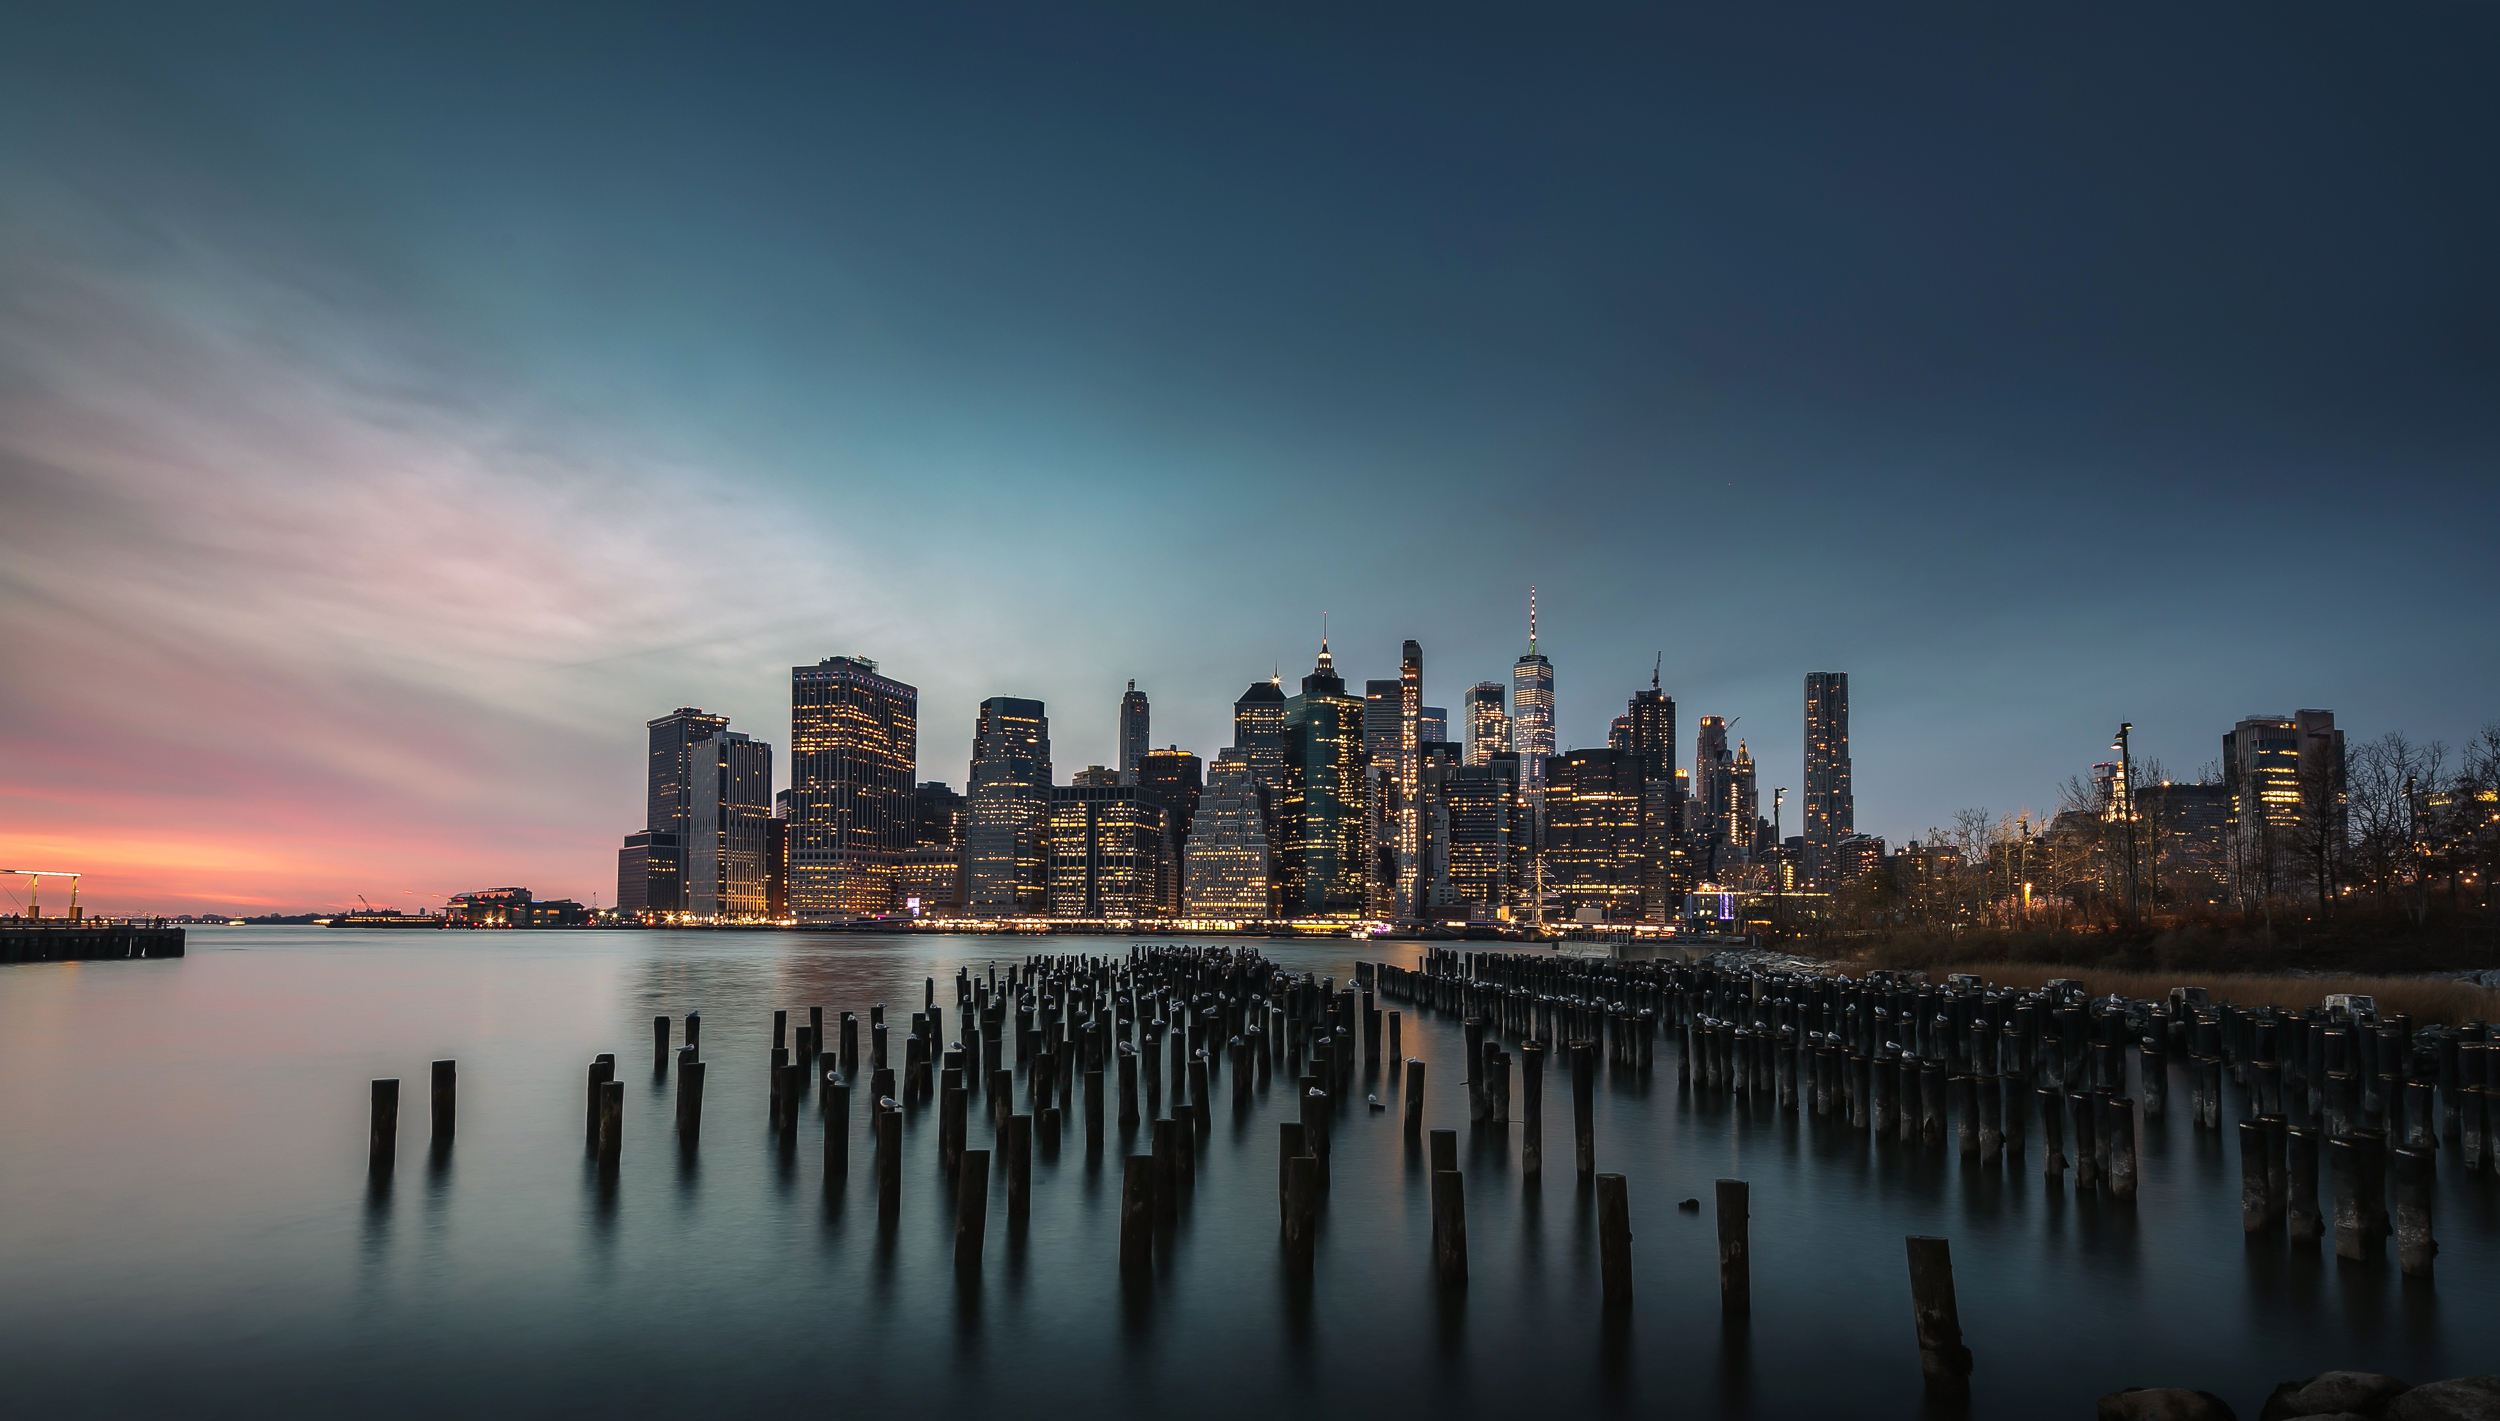 General 2500x1421 New York City sea water night lights city cityscape sky clear sky sunset building outdoors photography